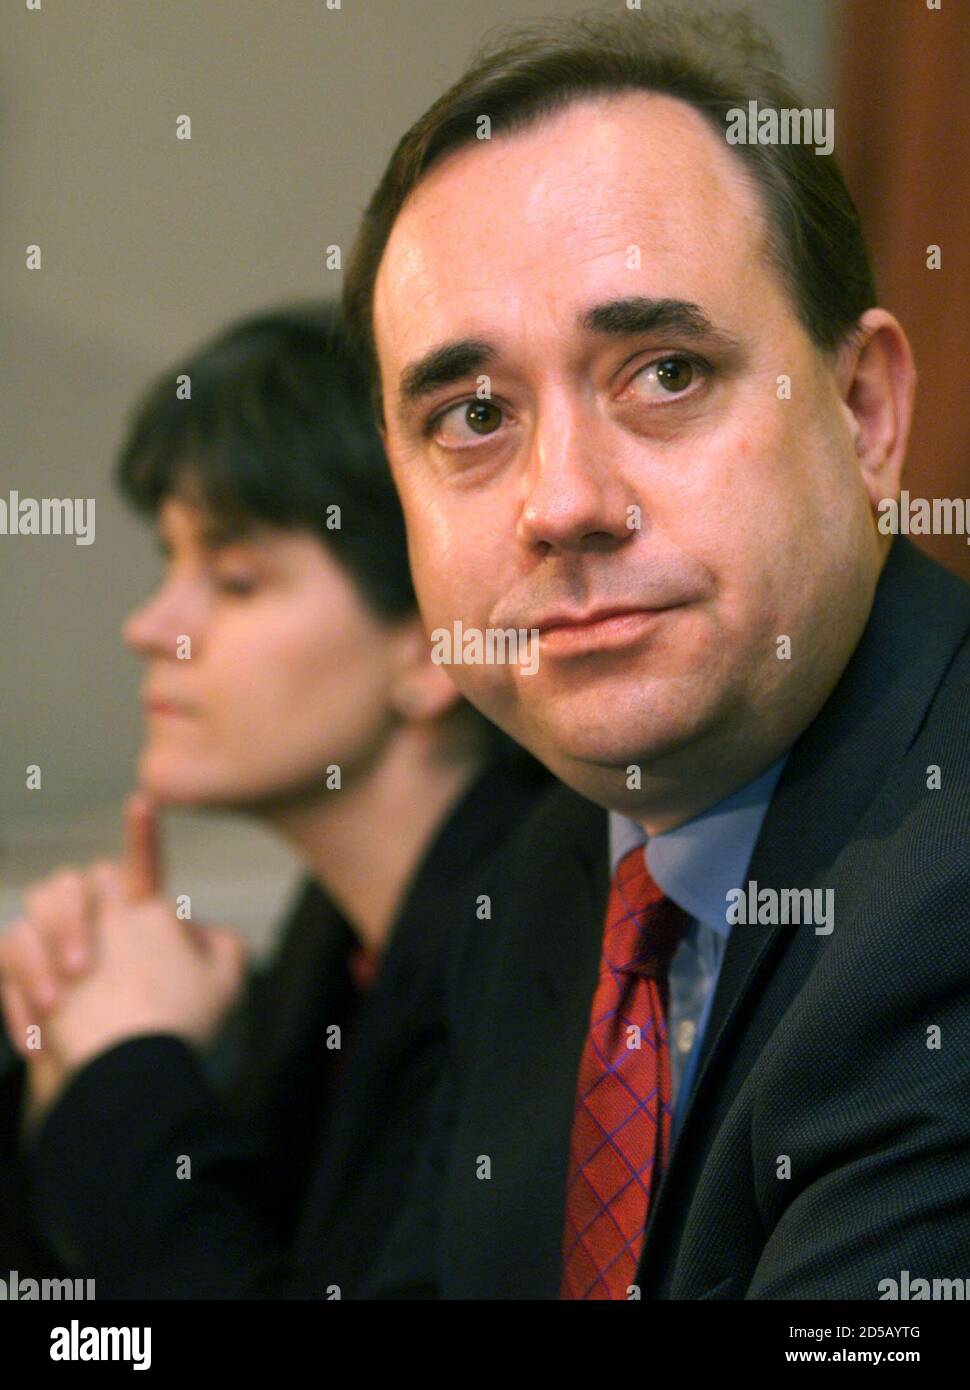 Leader of the Scottish National Party Alex Salmond with newly elected parliament member Nicola Sturgeon listens to questions from reporters during a post election press conference in Edinburgh, May 7. Scotland faces a coalition government after the Labour Party failed to gain an overall majority in Edinburgh's first parliament in 300 years.  AS/ME Stock Photo